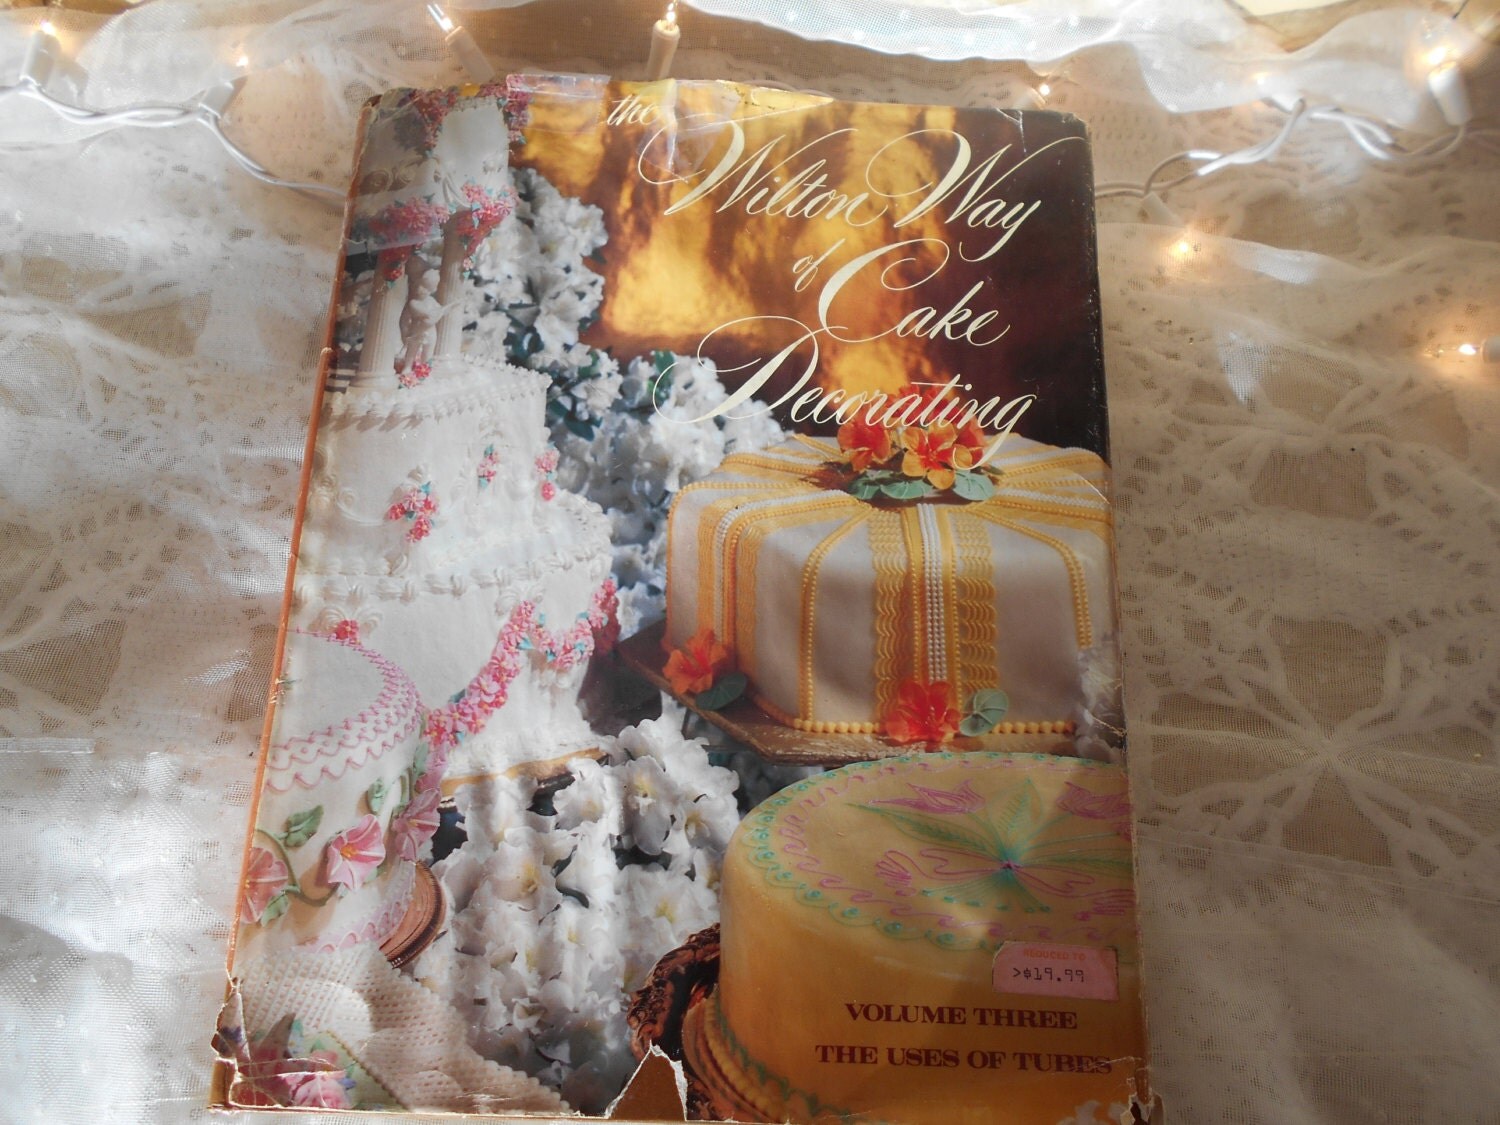 1979 Vintage The Wilton Way Of Cake Decorating Book